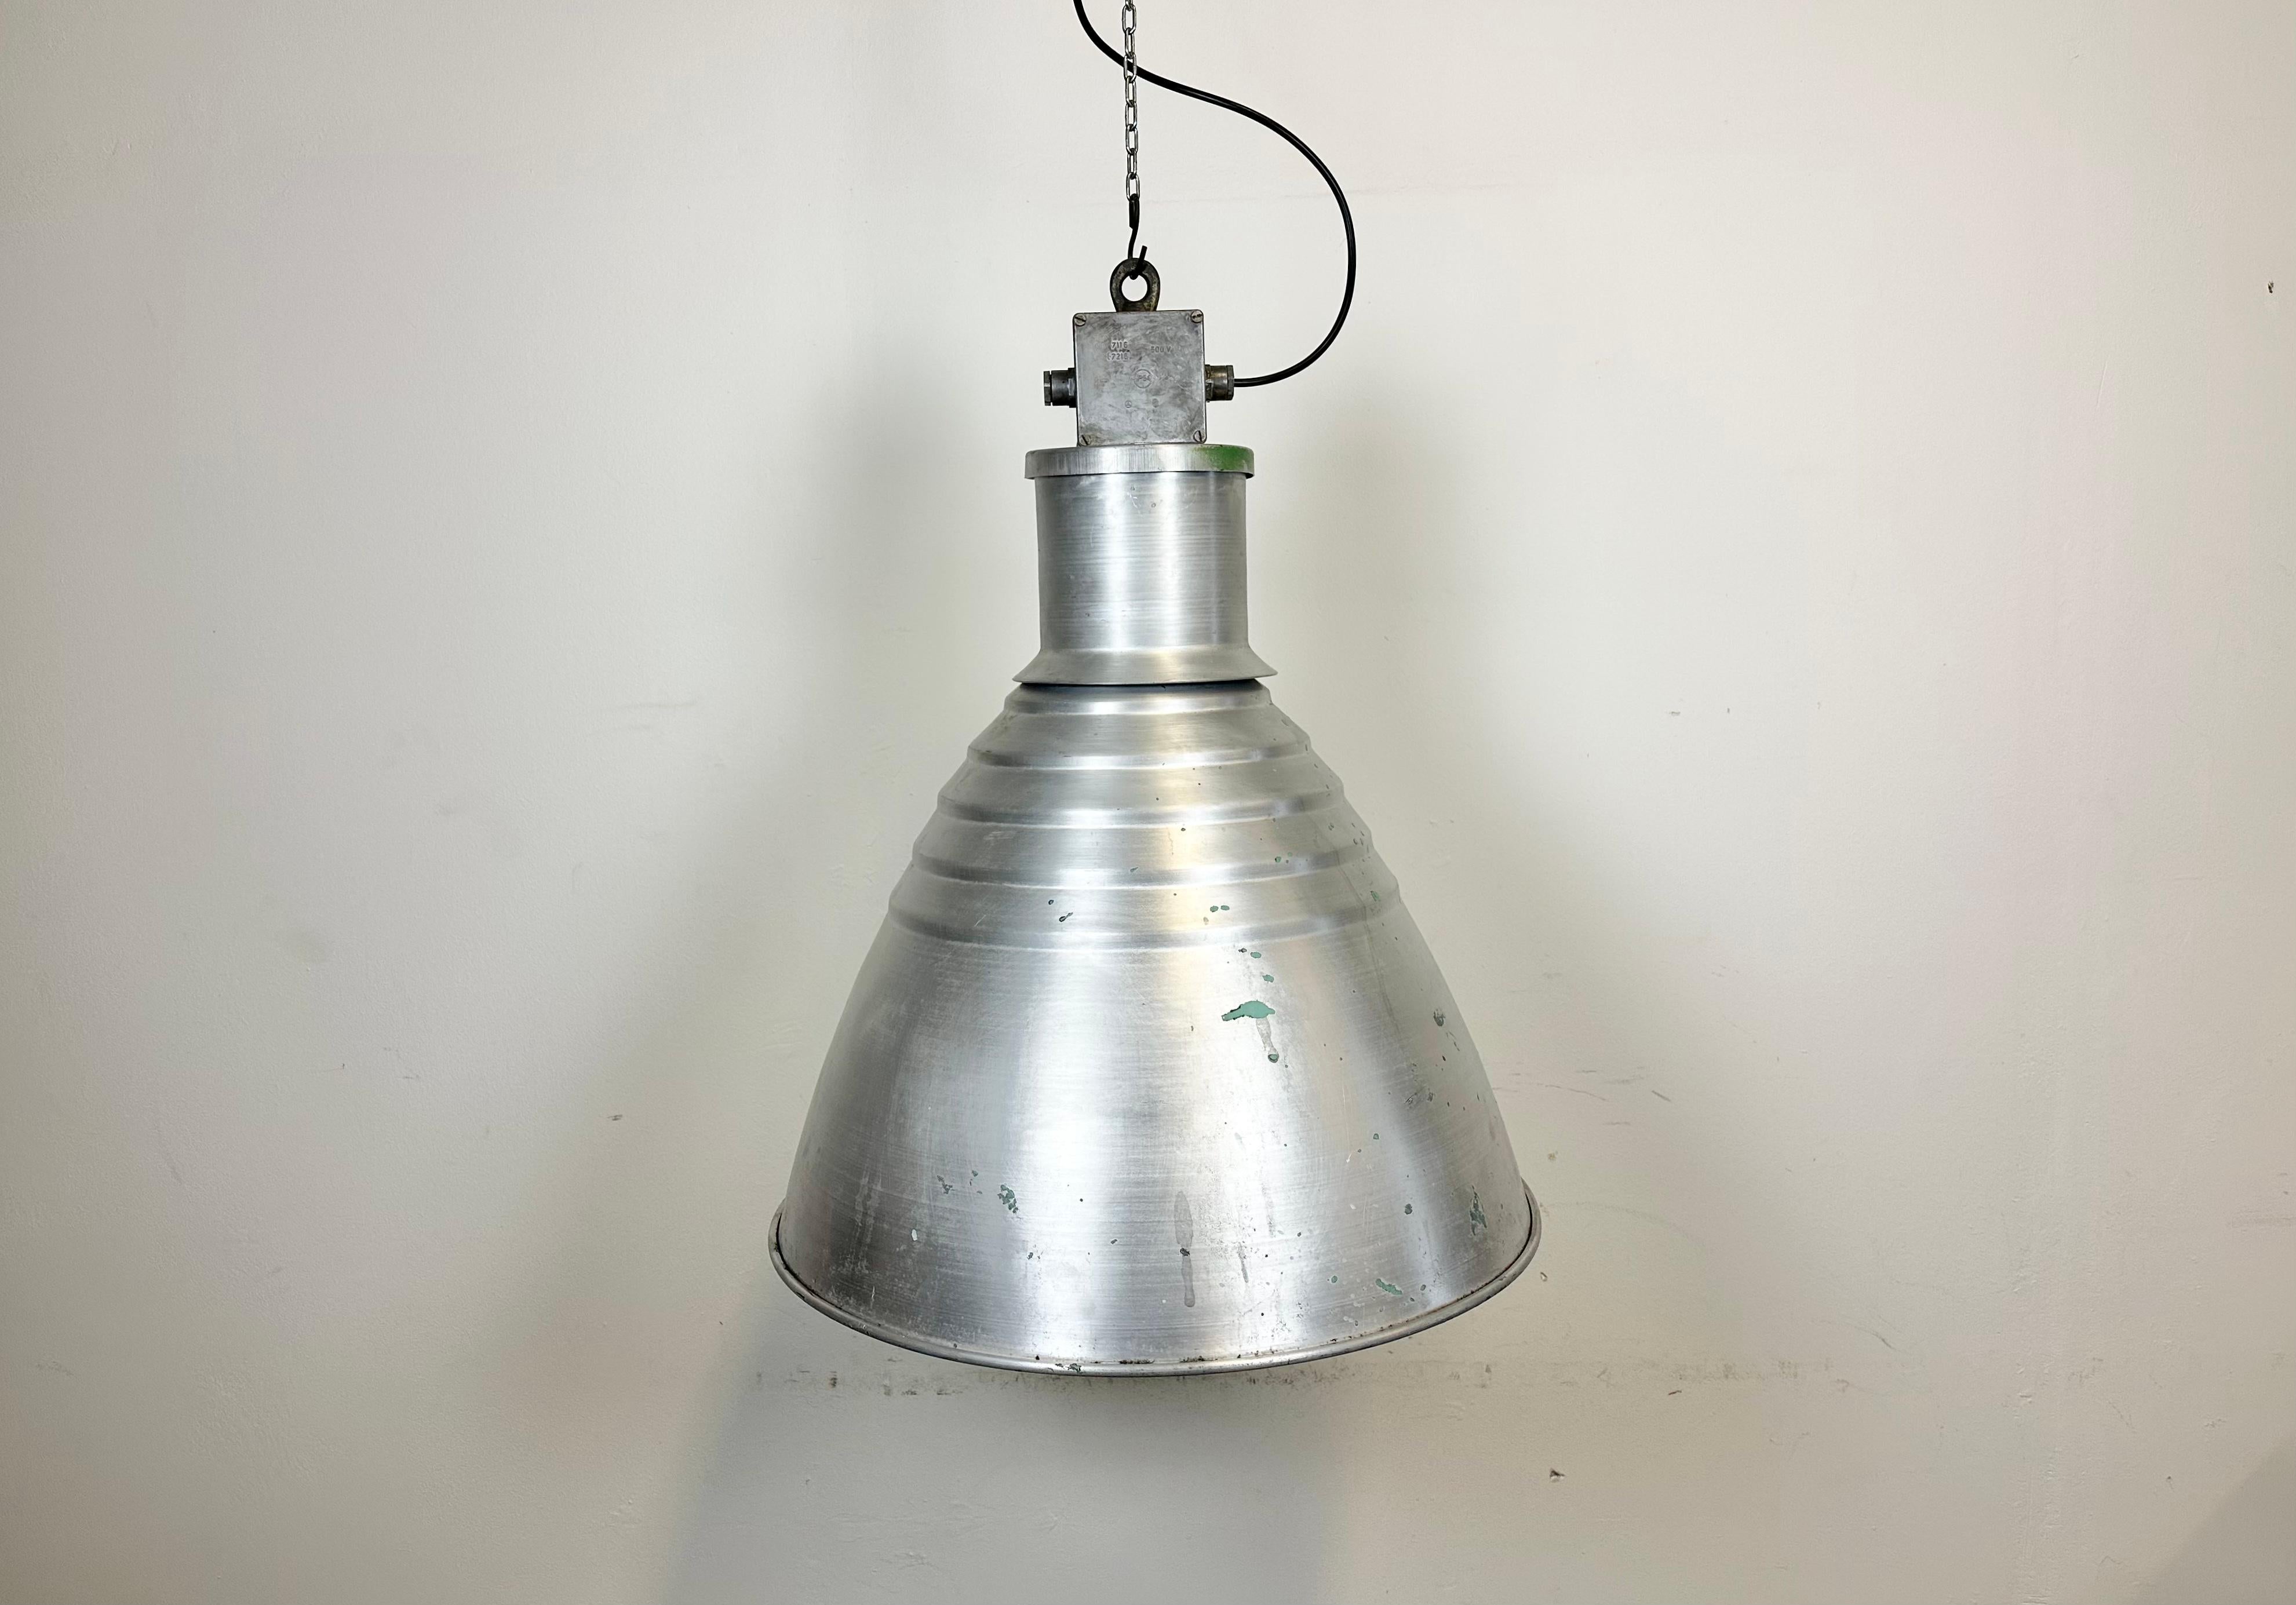 This pendant lamp was made by Elektrosvit and originally used in a factories in former Czechoslovakia in the 1960s. The piece is comprised of an aluminium body and a cast aluminium top box. The lamp is fully functional and features a new porcelain